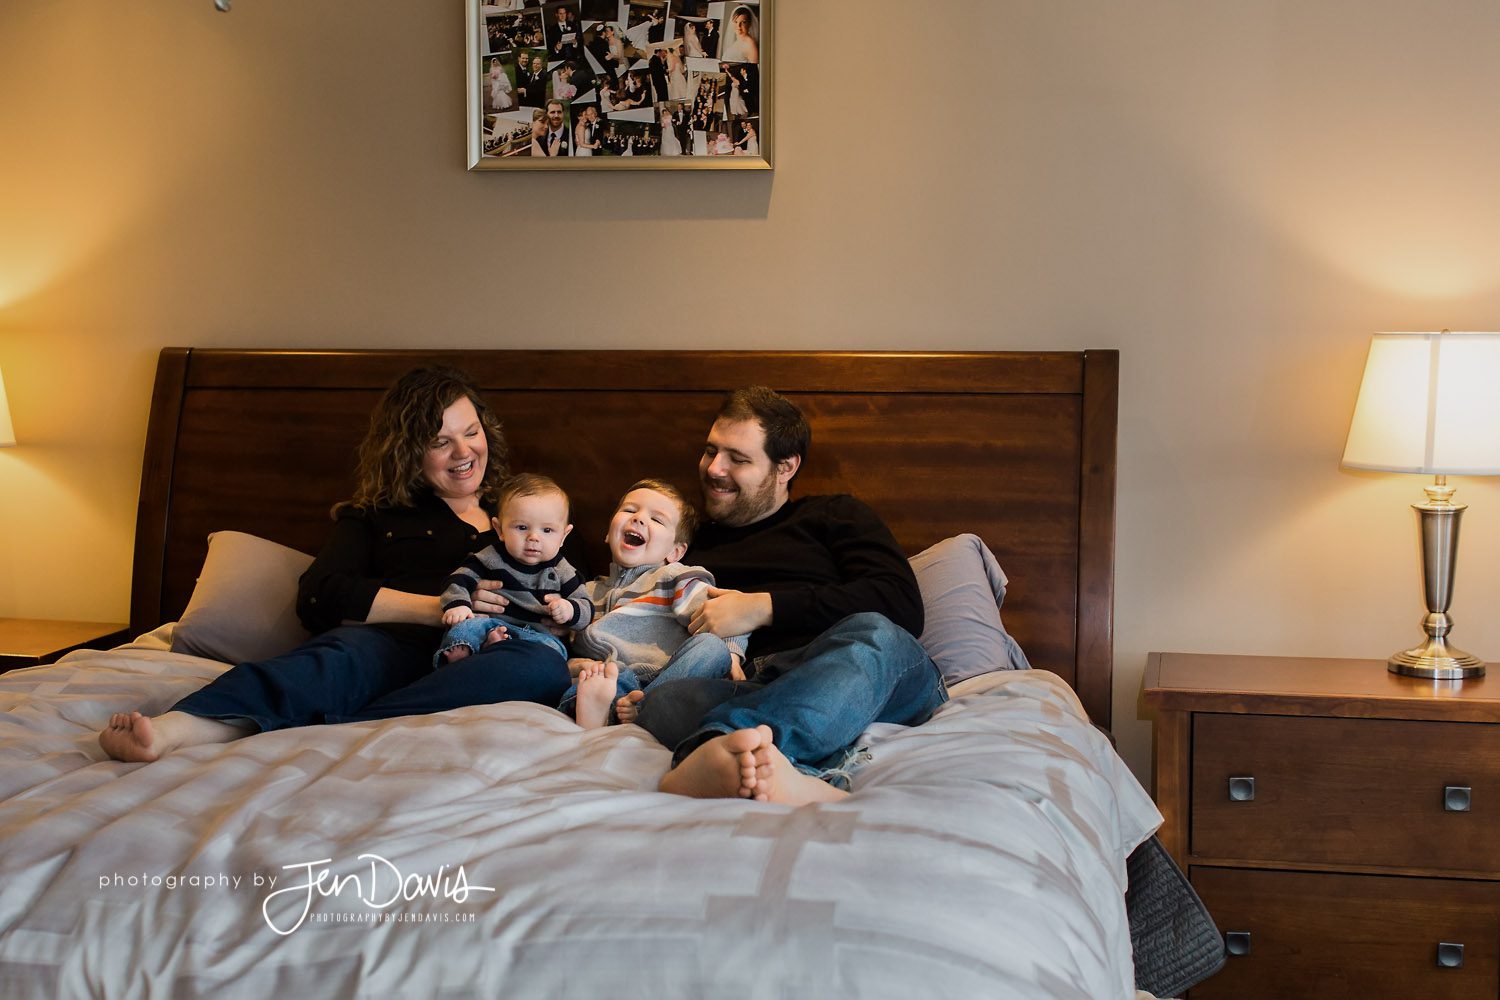 family on a bed at home laughing